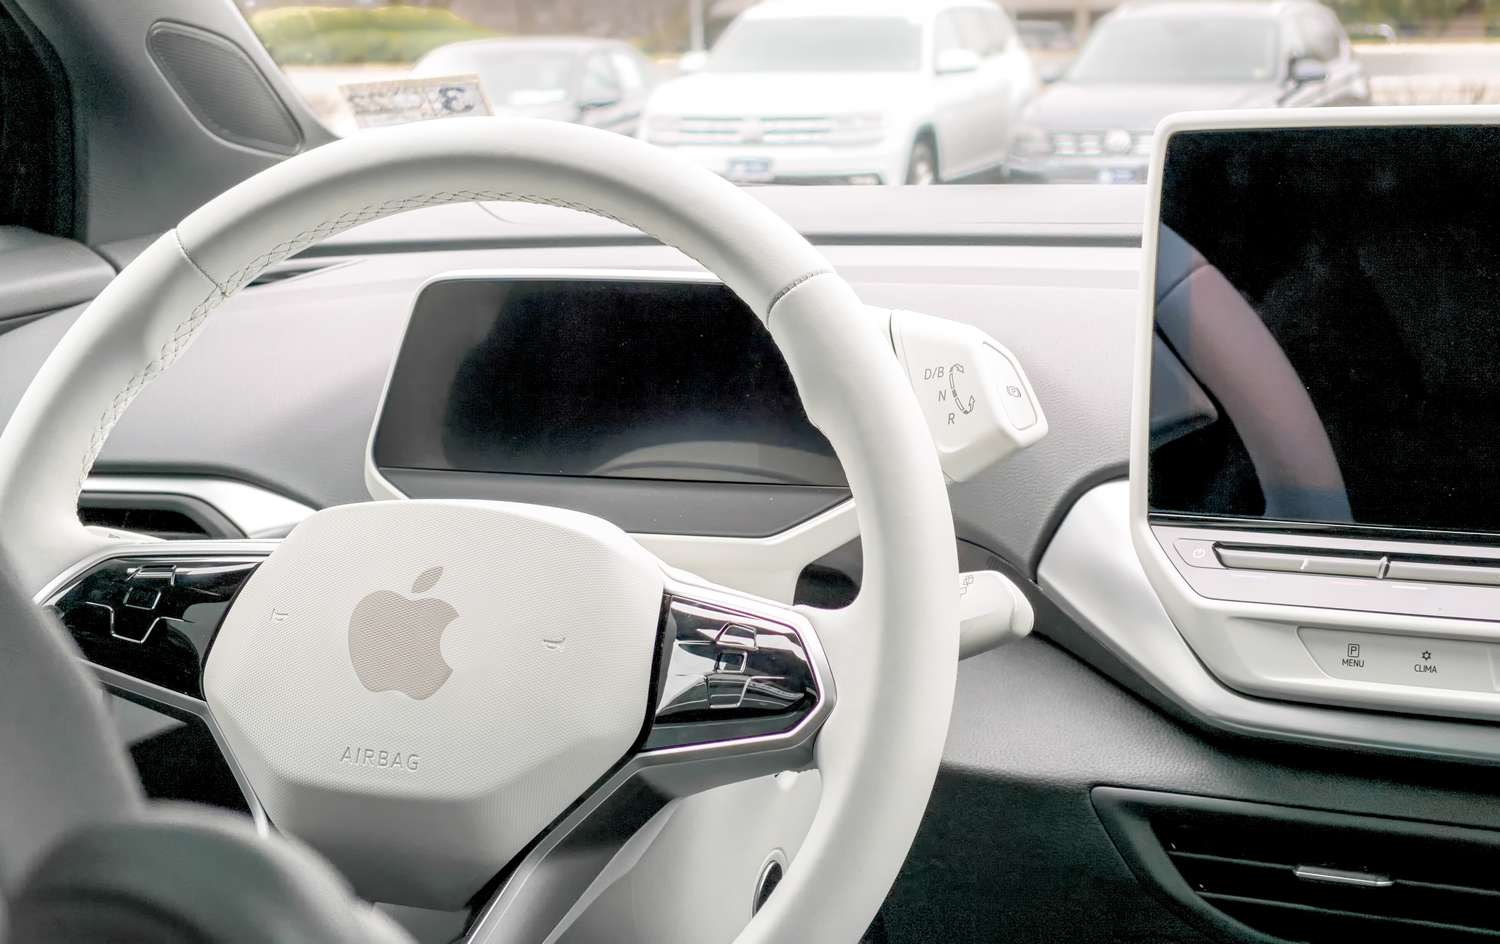 Plenty of expectations from Apple Car